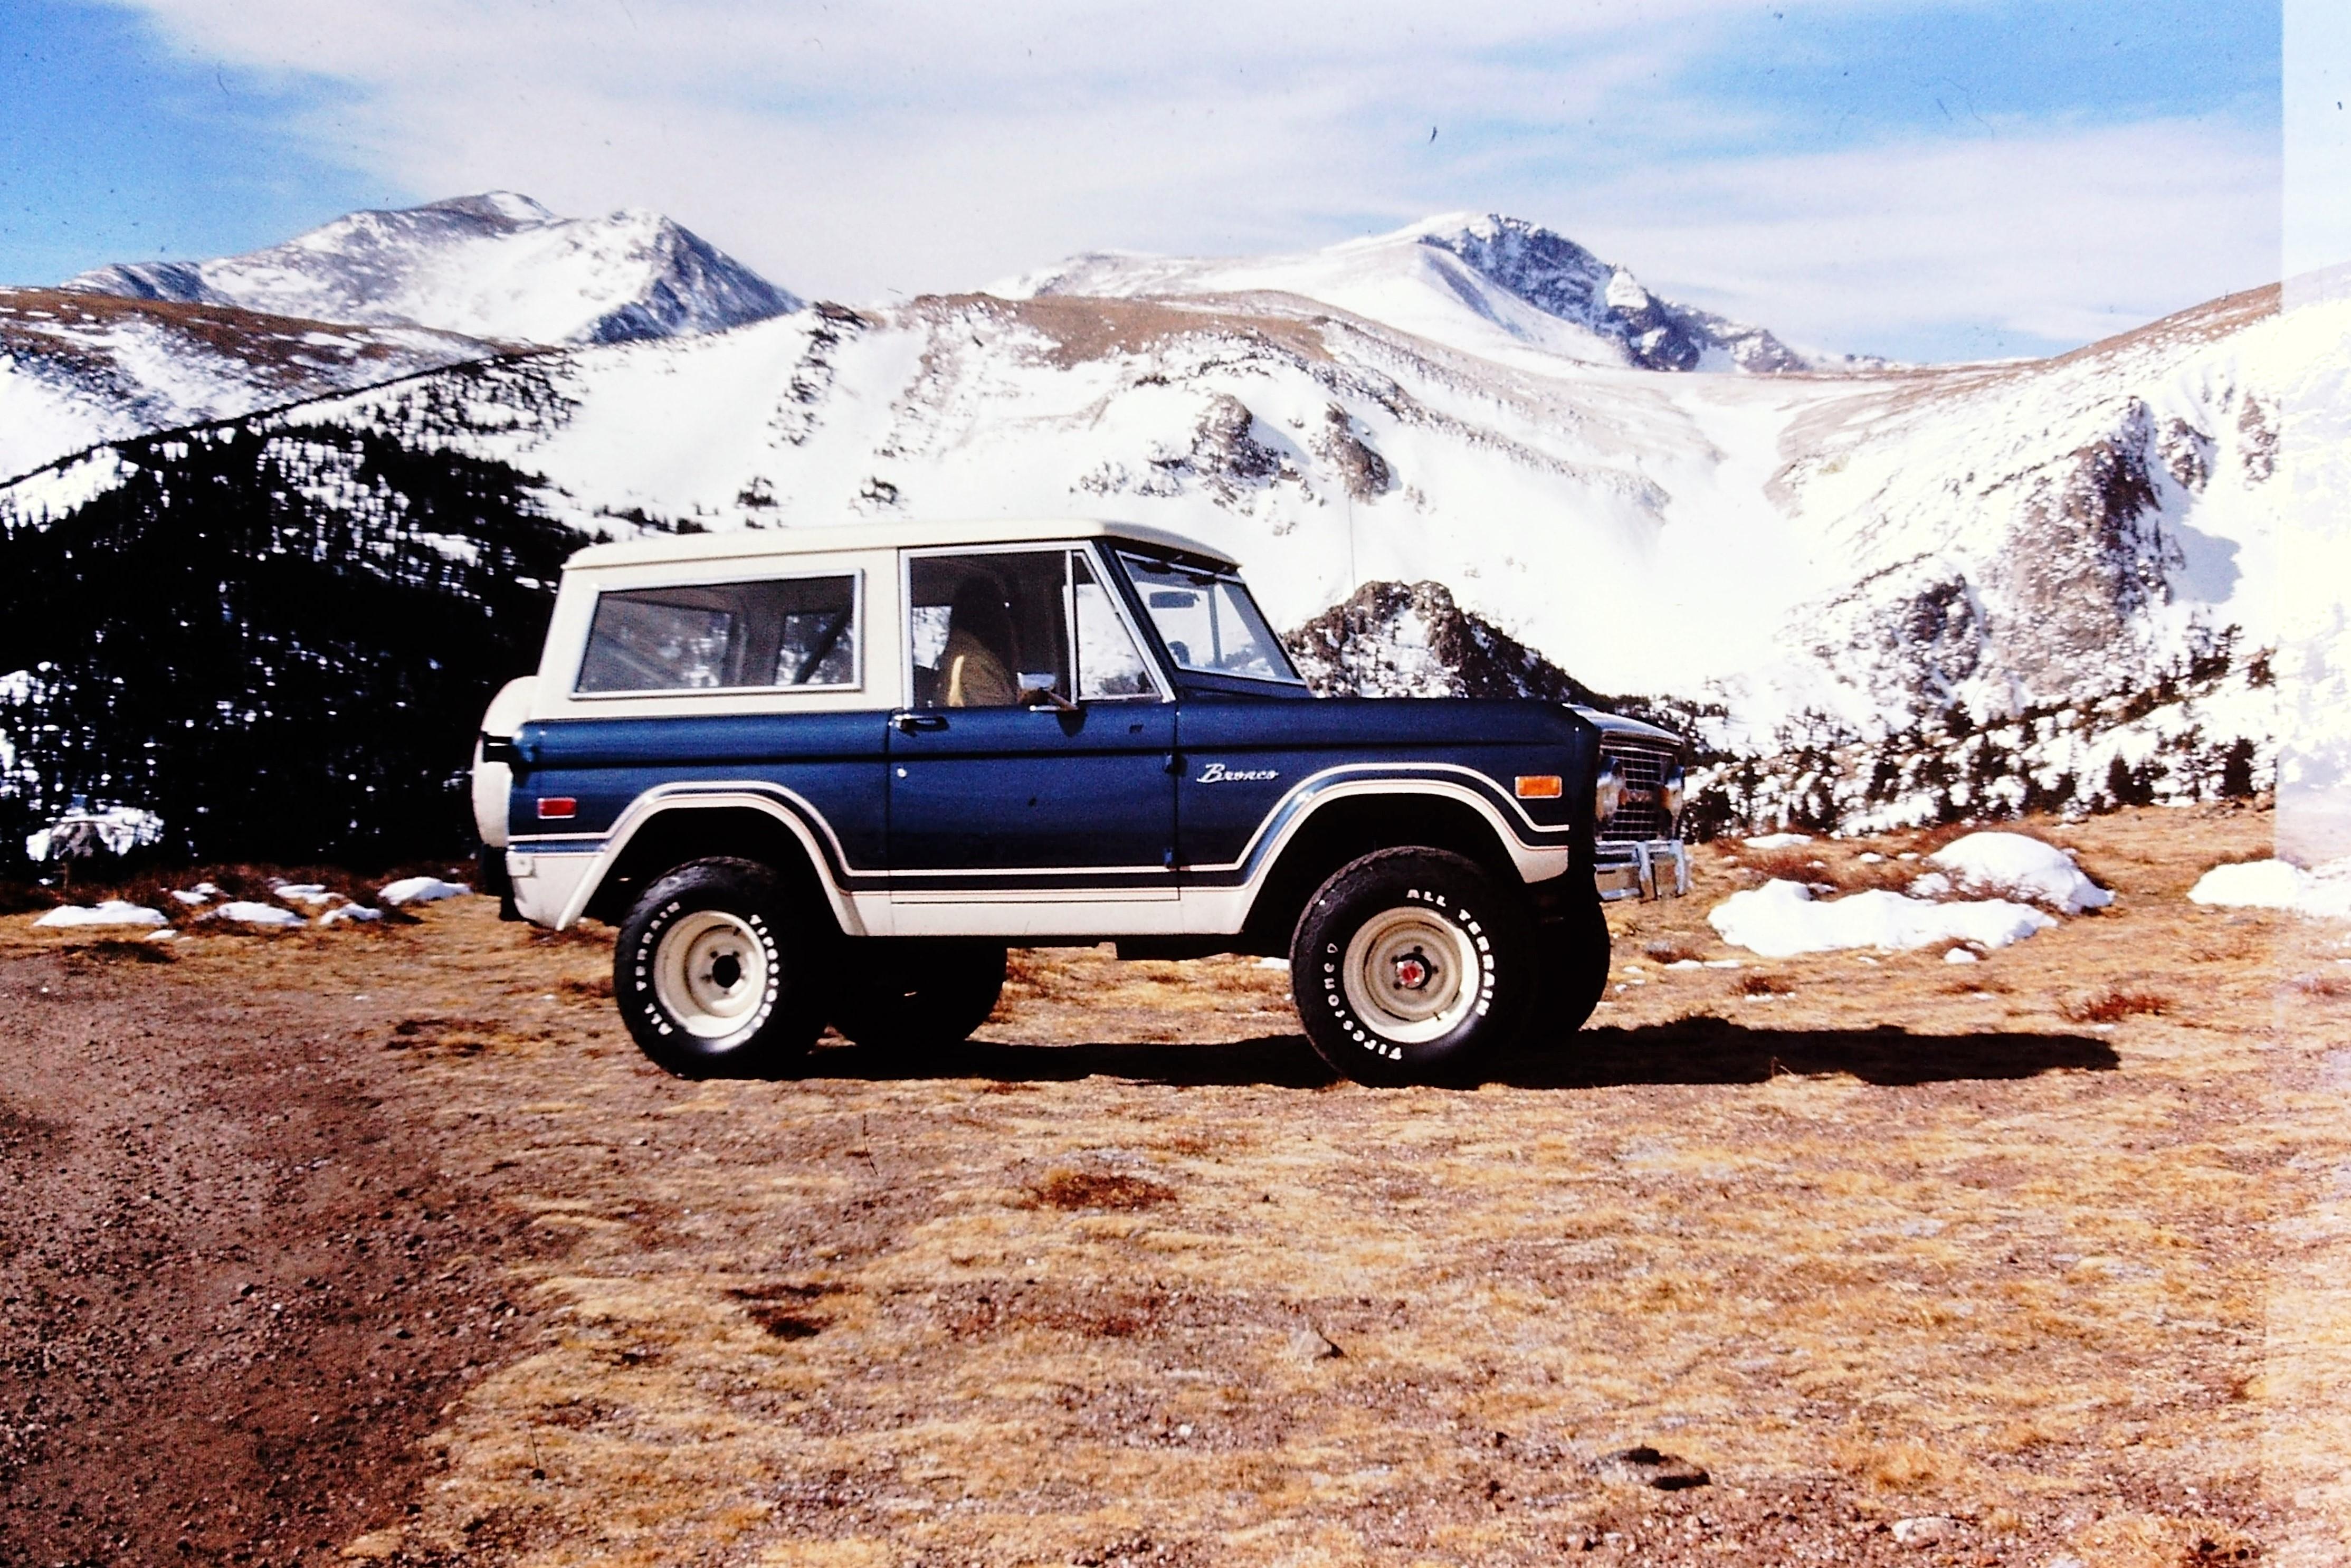 Getting dirty and making memories - this is what 50 years of off-roading in a 1972 Bronco looks like